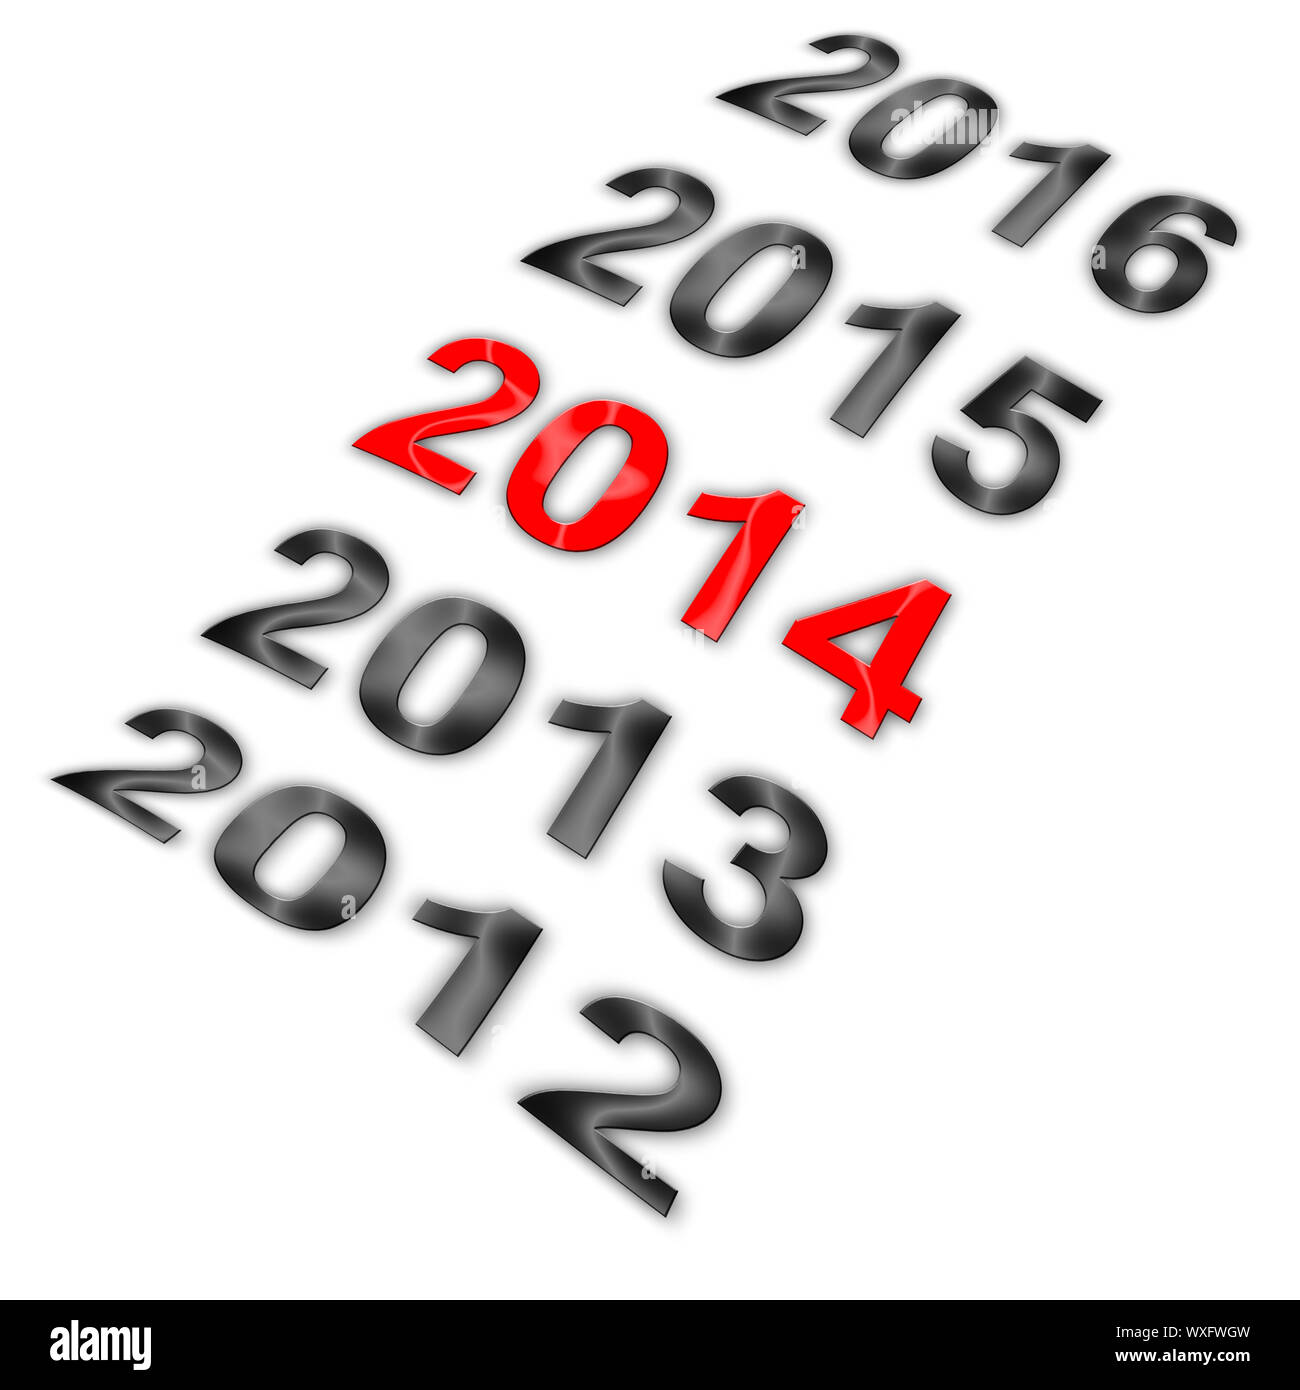 Illustration of series of years from 2012 to 2016 with highlighted 2014 Stock Photo